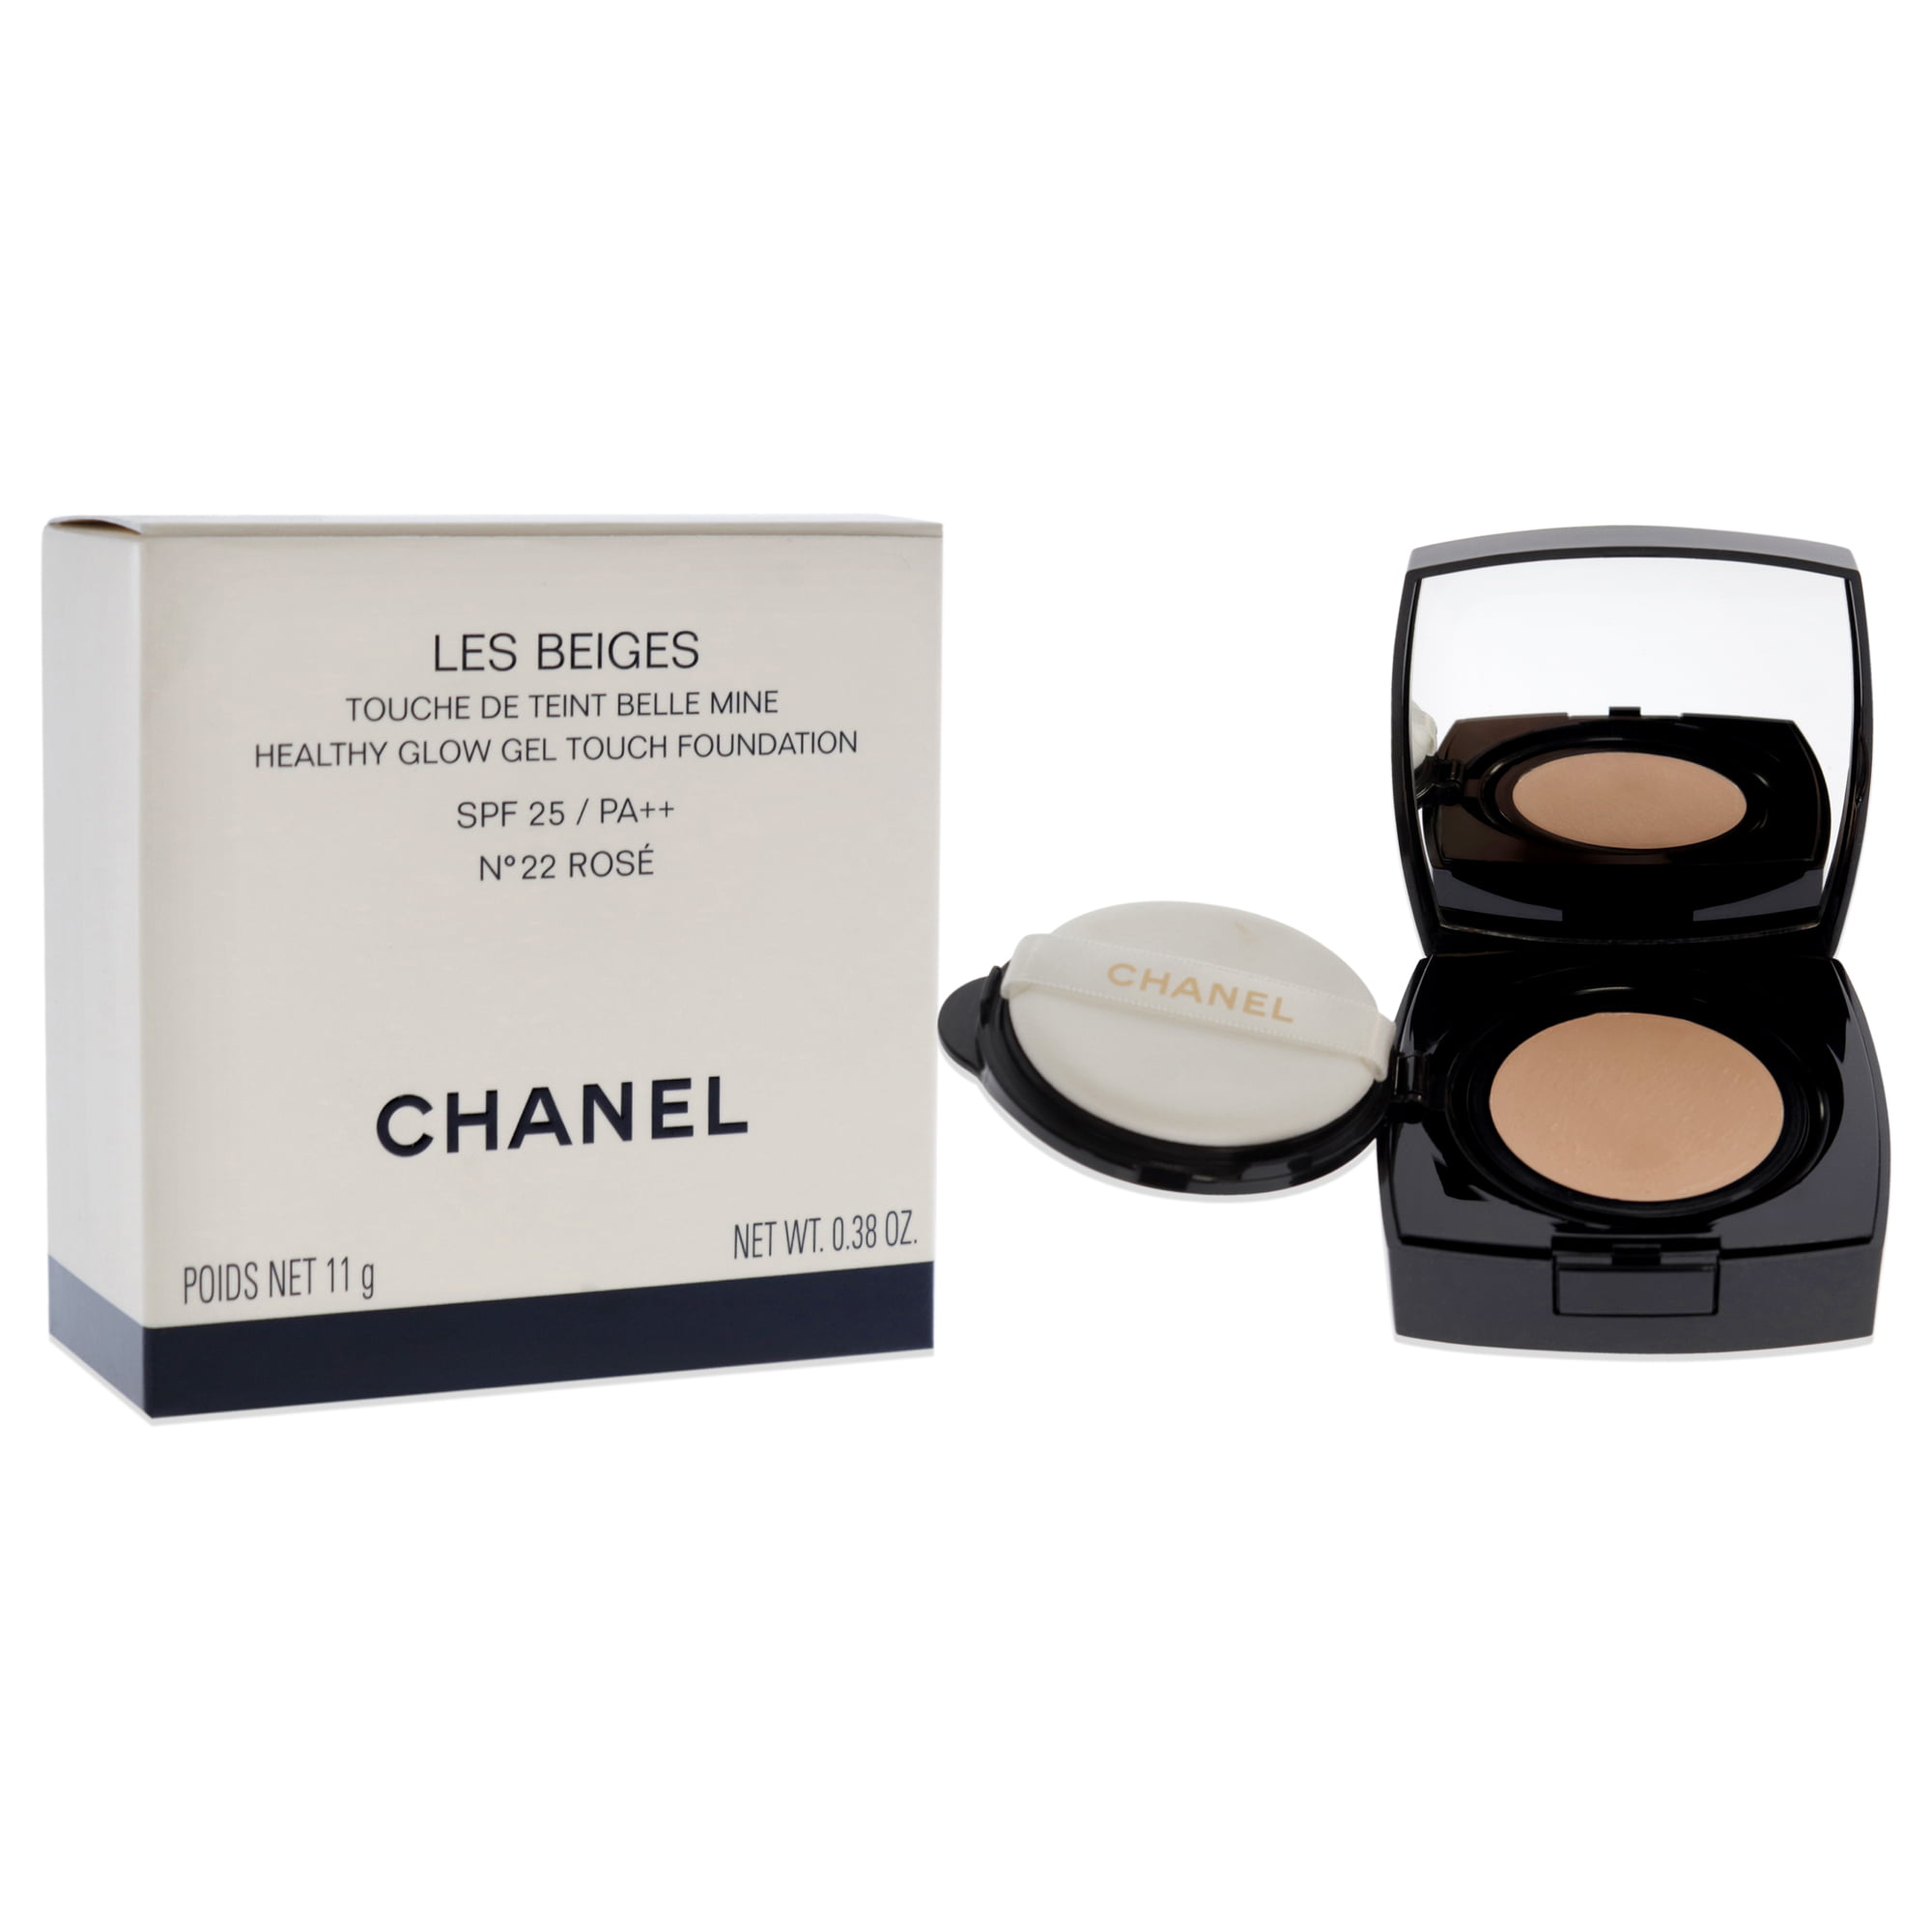 Chanel Les Beiges Healthy Glow Gel Touch Foundation SPF 25 - 22